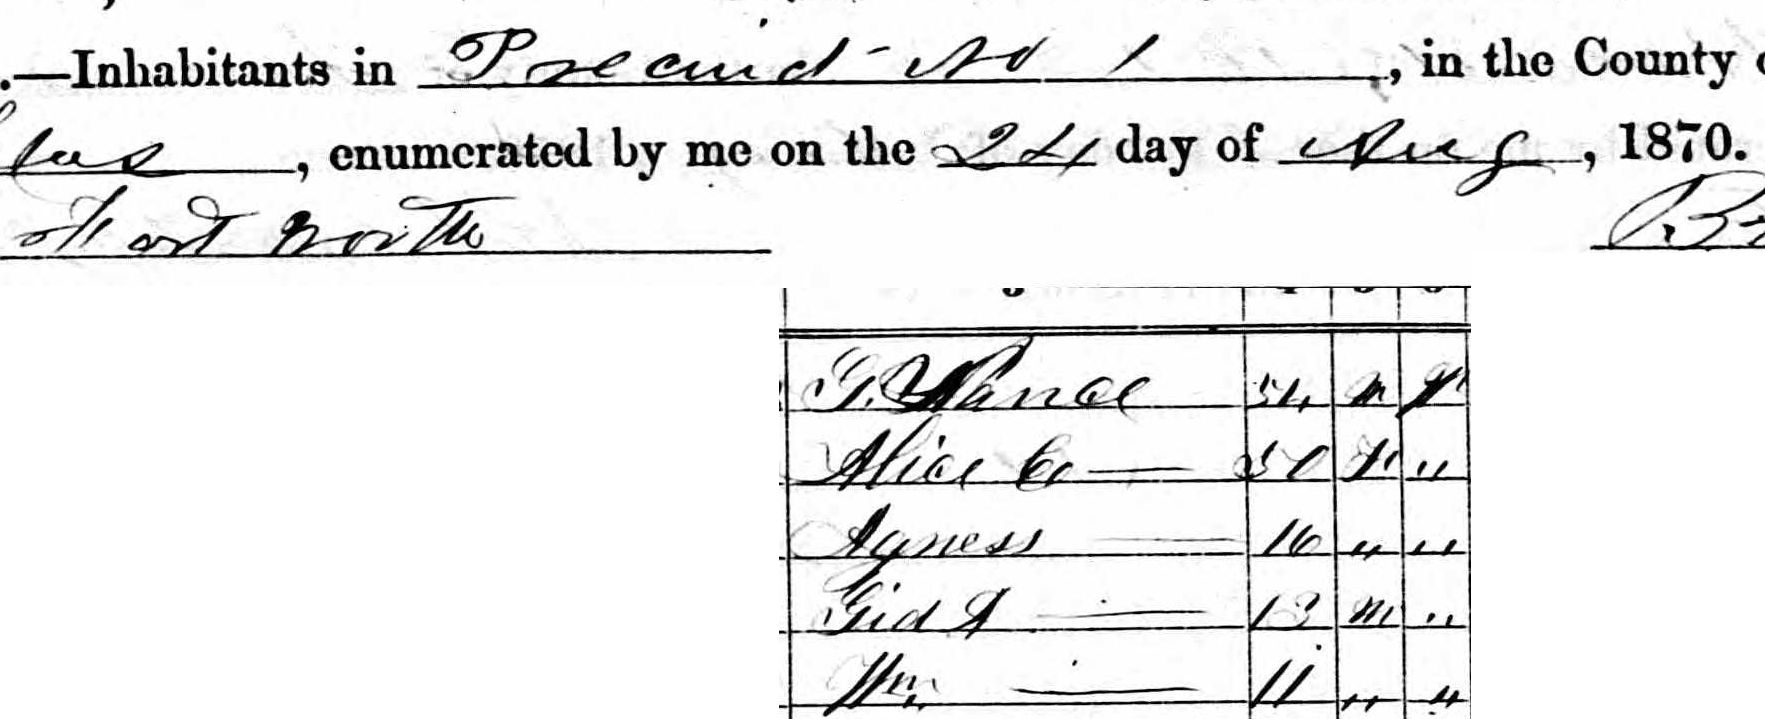 courtright nance 70 census